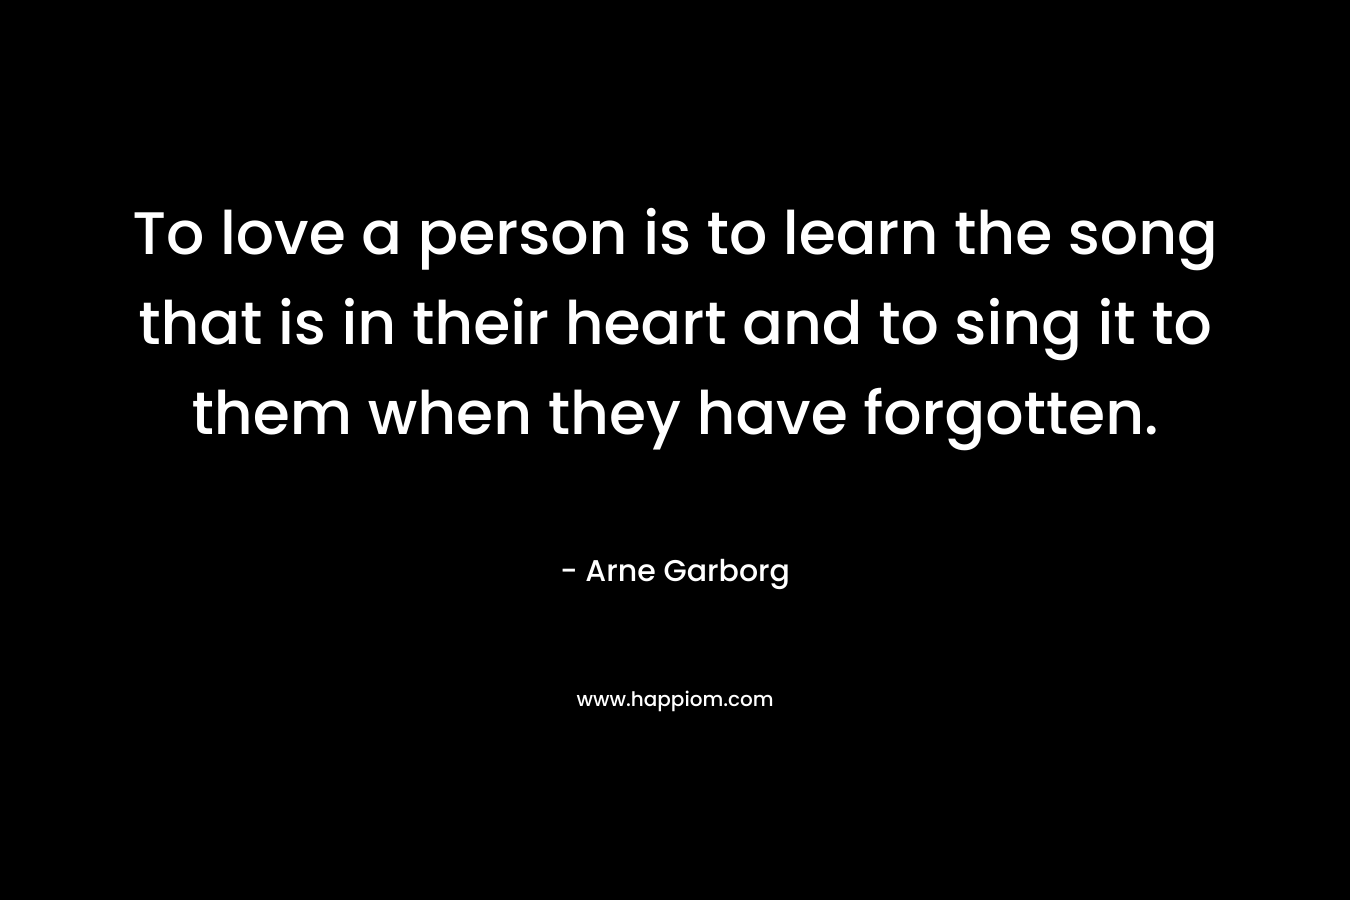 To love a person is to learn the song that is in their heart and to sing it to them when they have forgotten. – Arne Garborg